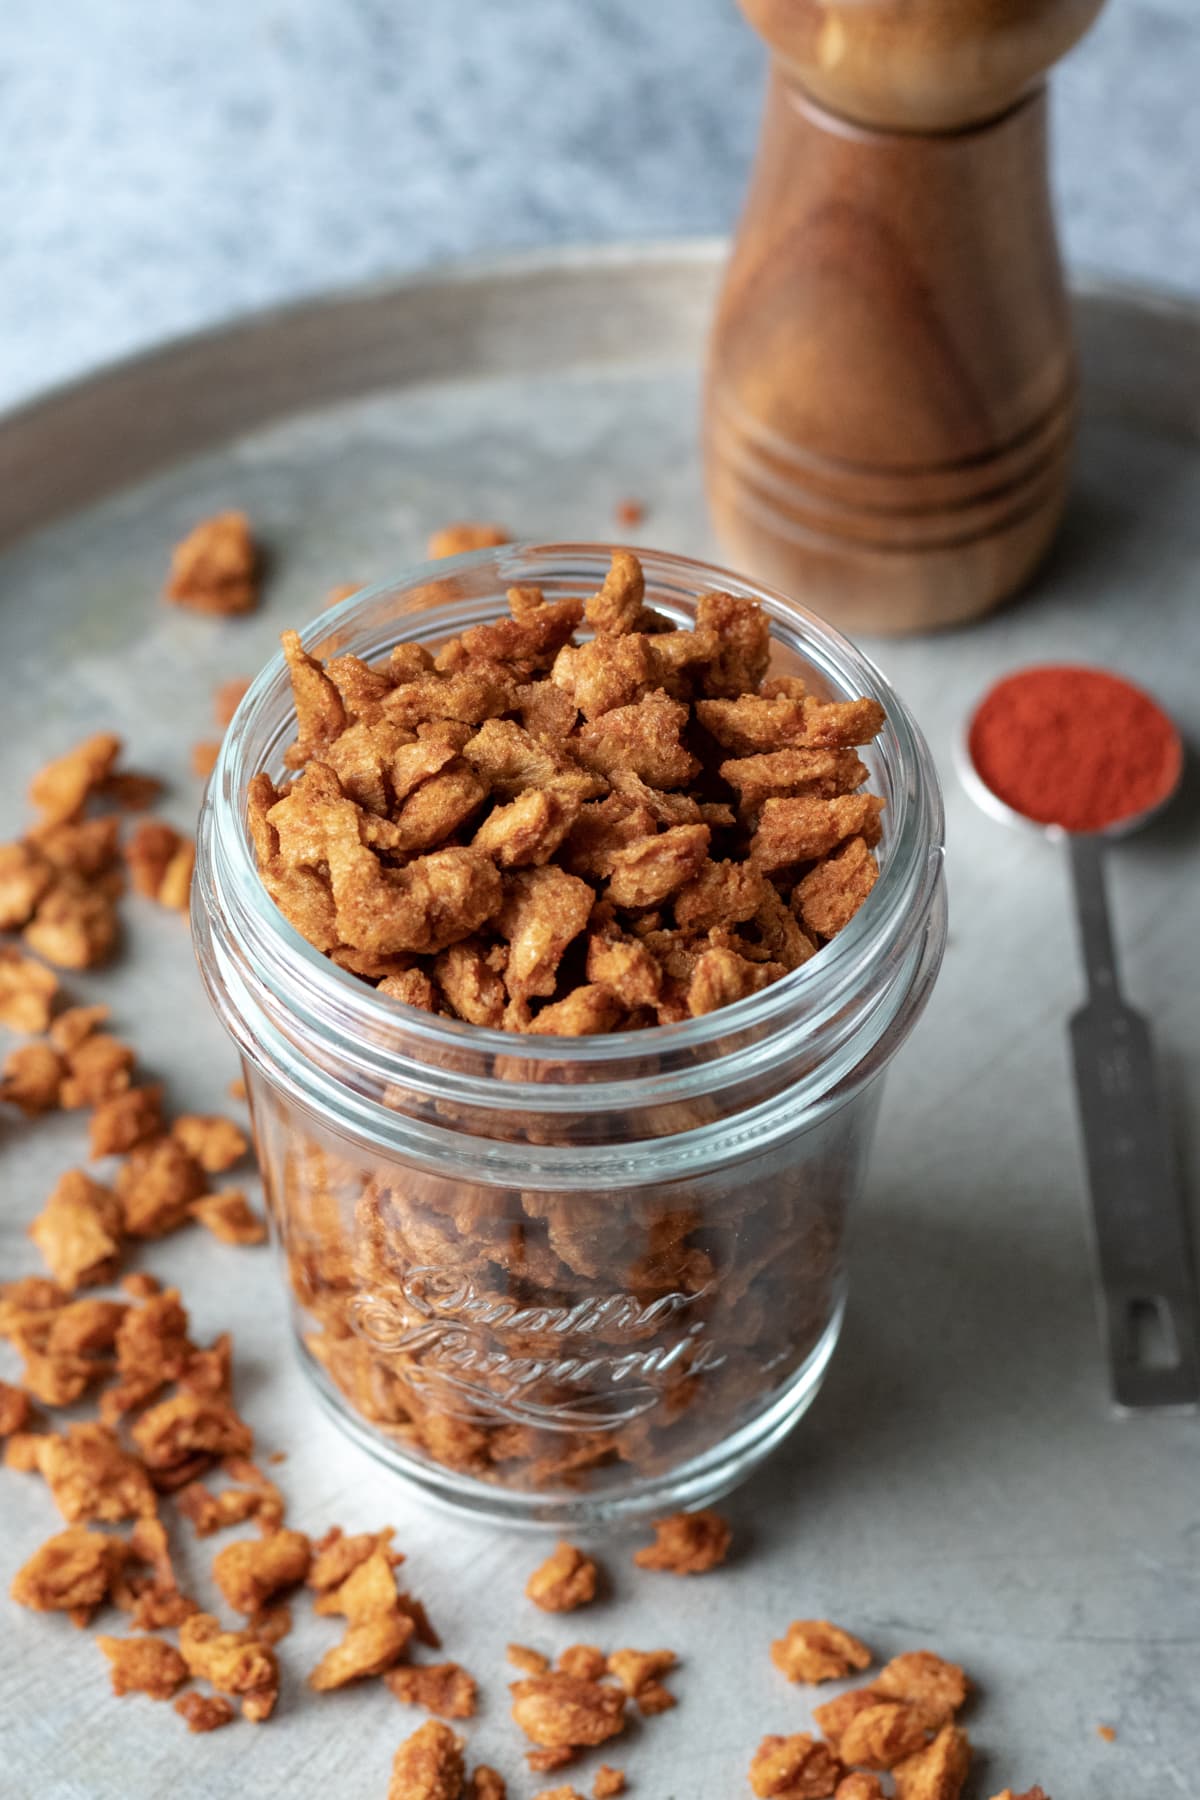 chunky vegan bacon bits in a jar and scattered on a tray.